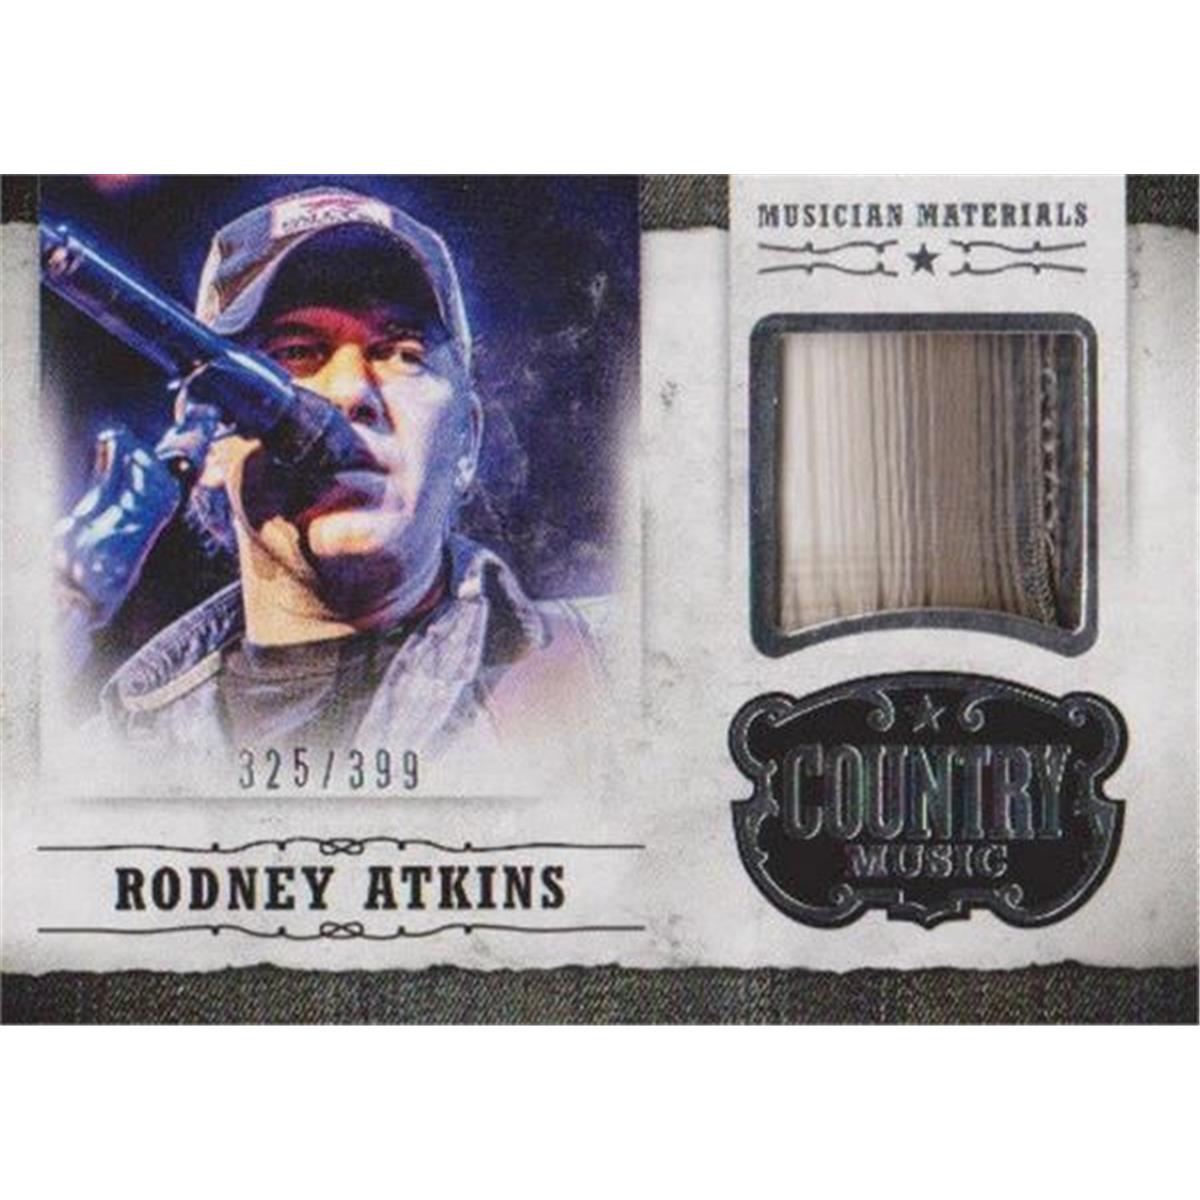 Picture of Autograph Warehouse 409069 Rodney Atkins Musician Worn Material Relic Patch Trading Card - 2014 Panini MRA LE 325-399